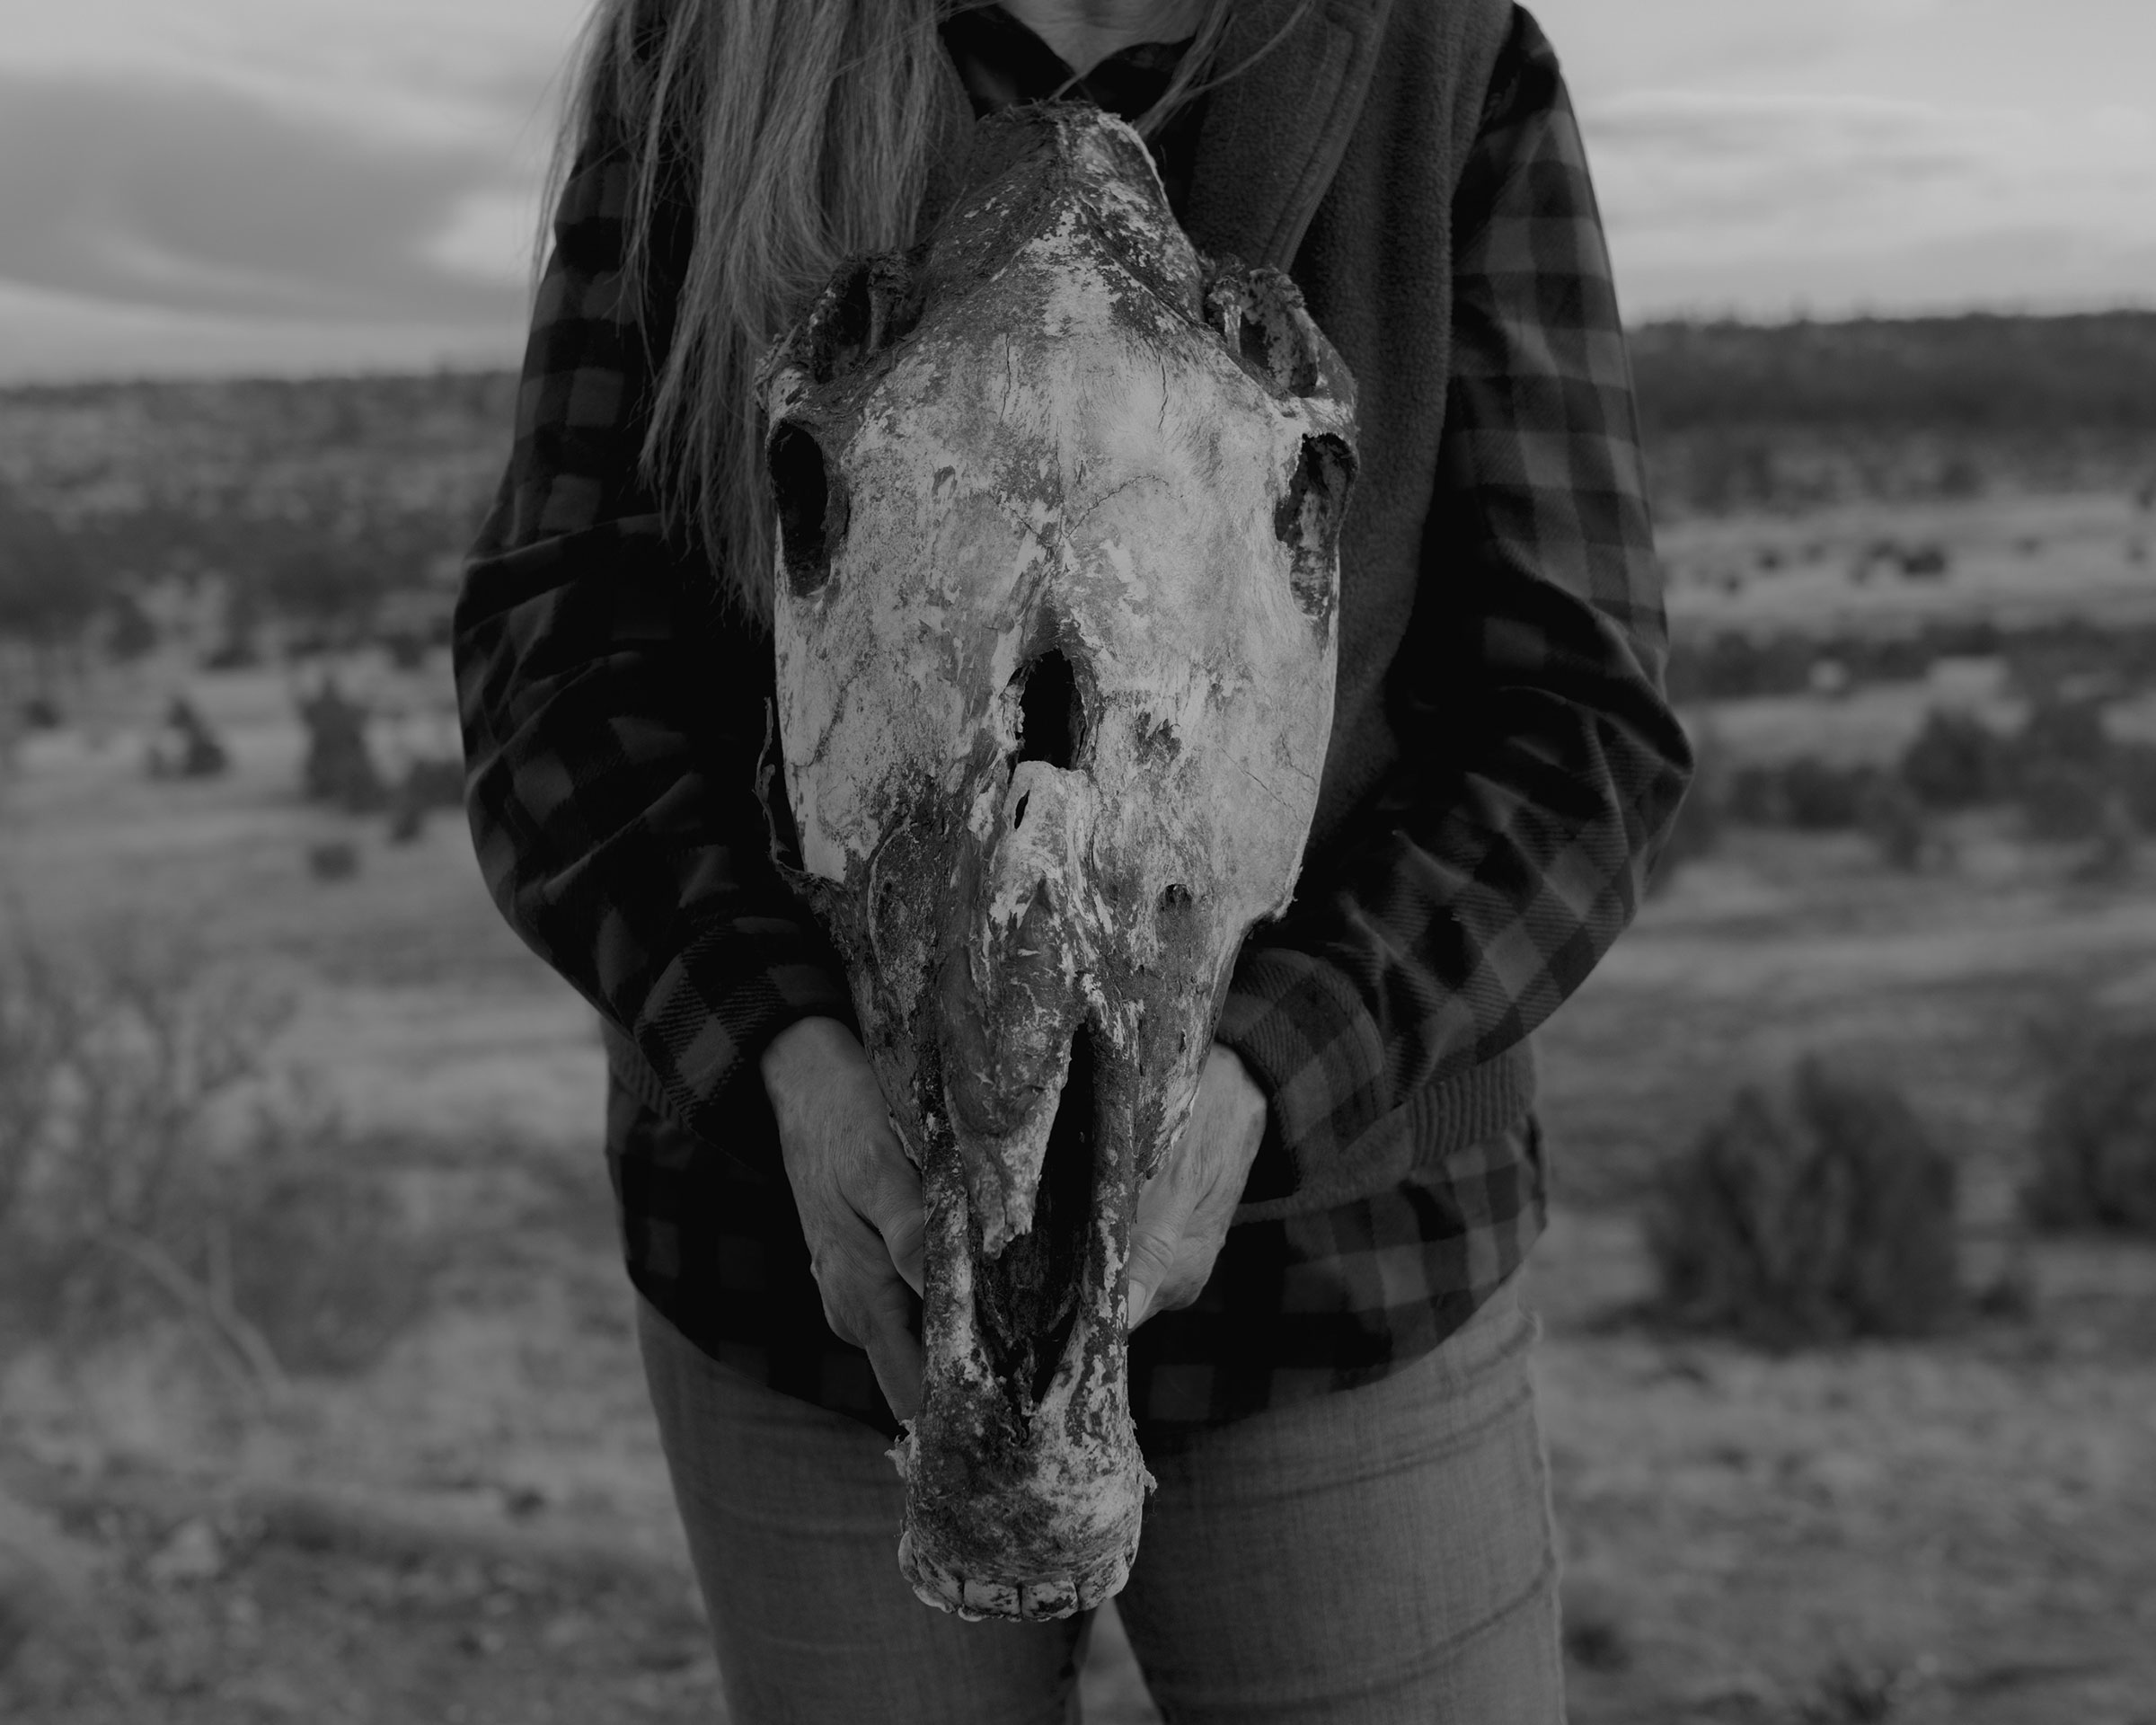 The skull of a mare, that was part of a band led by a black stallion known as Midnight, shows a bullet hole directly in the middle of its head (Bryan Schutmaat for TIME)